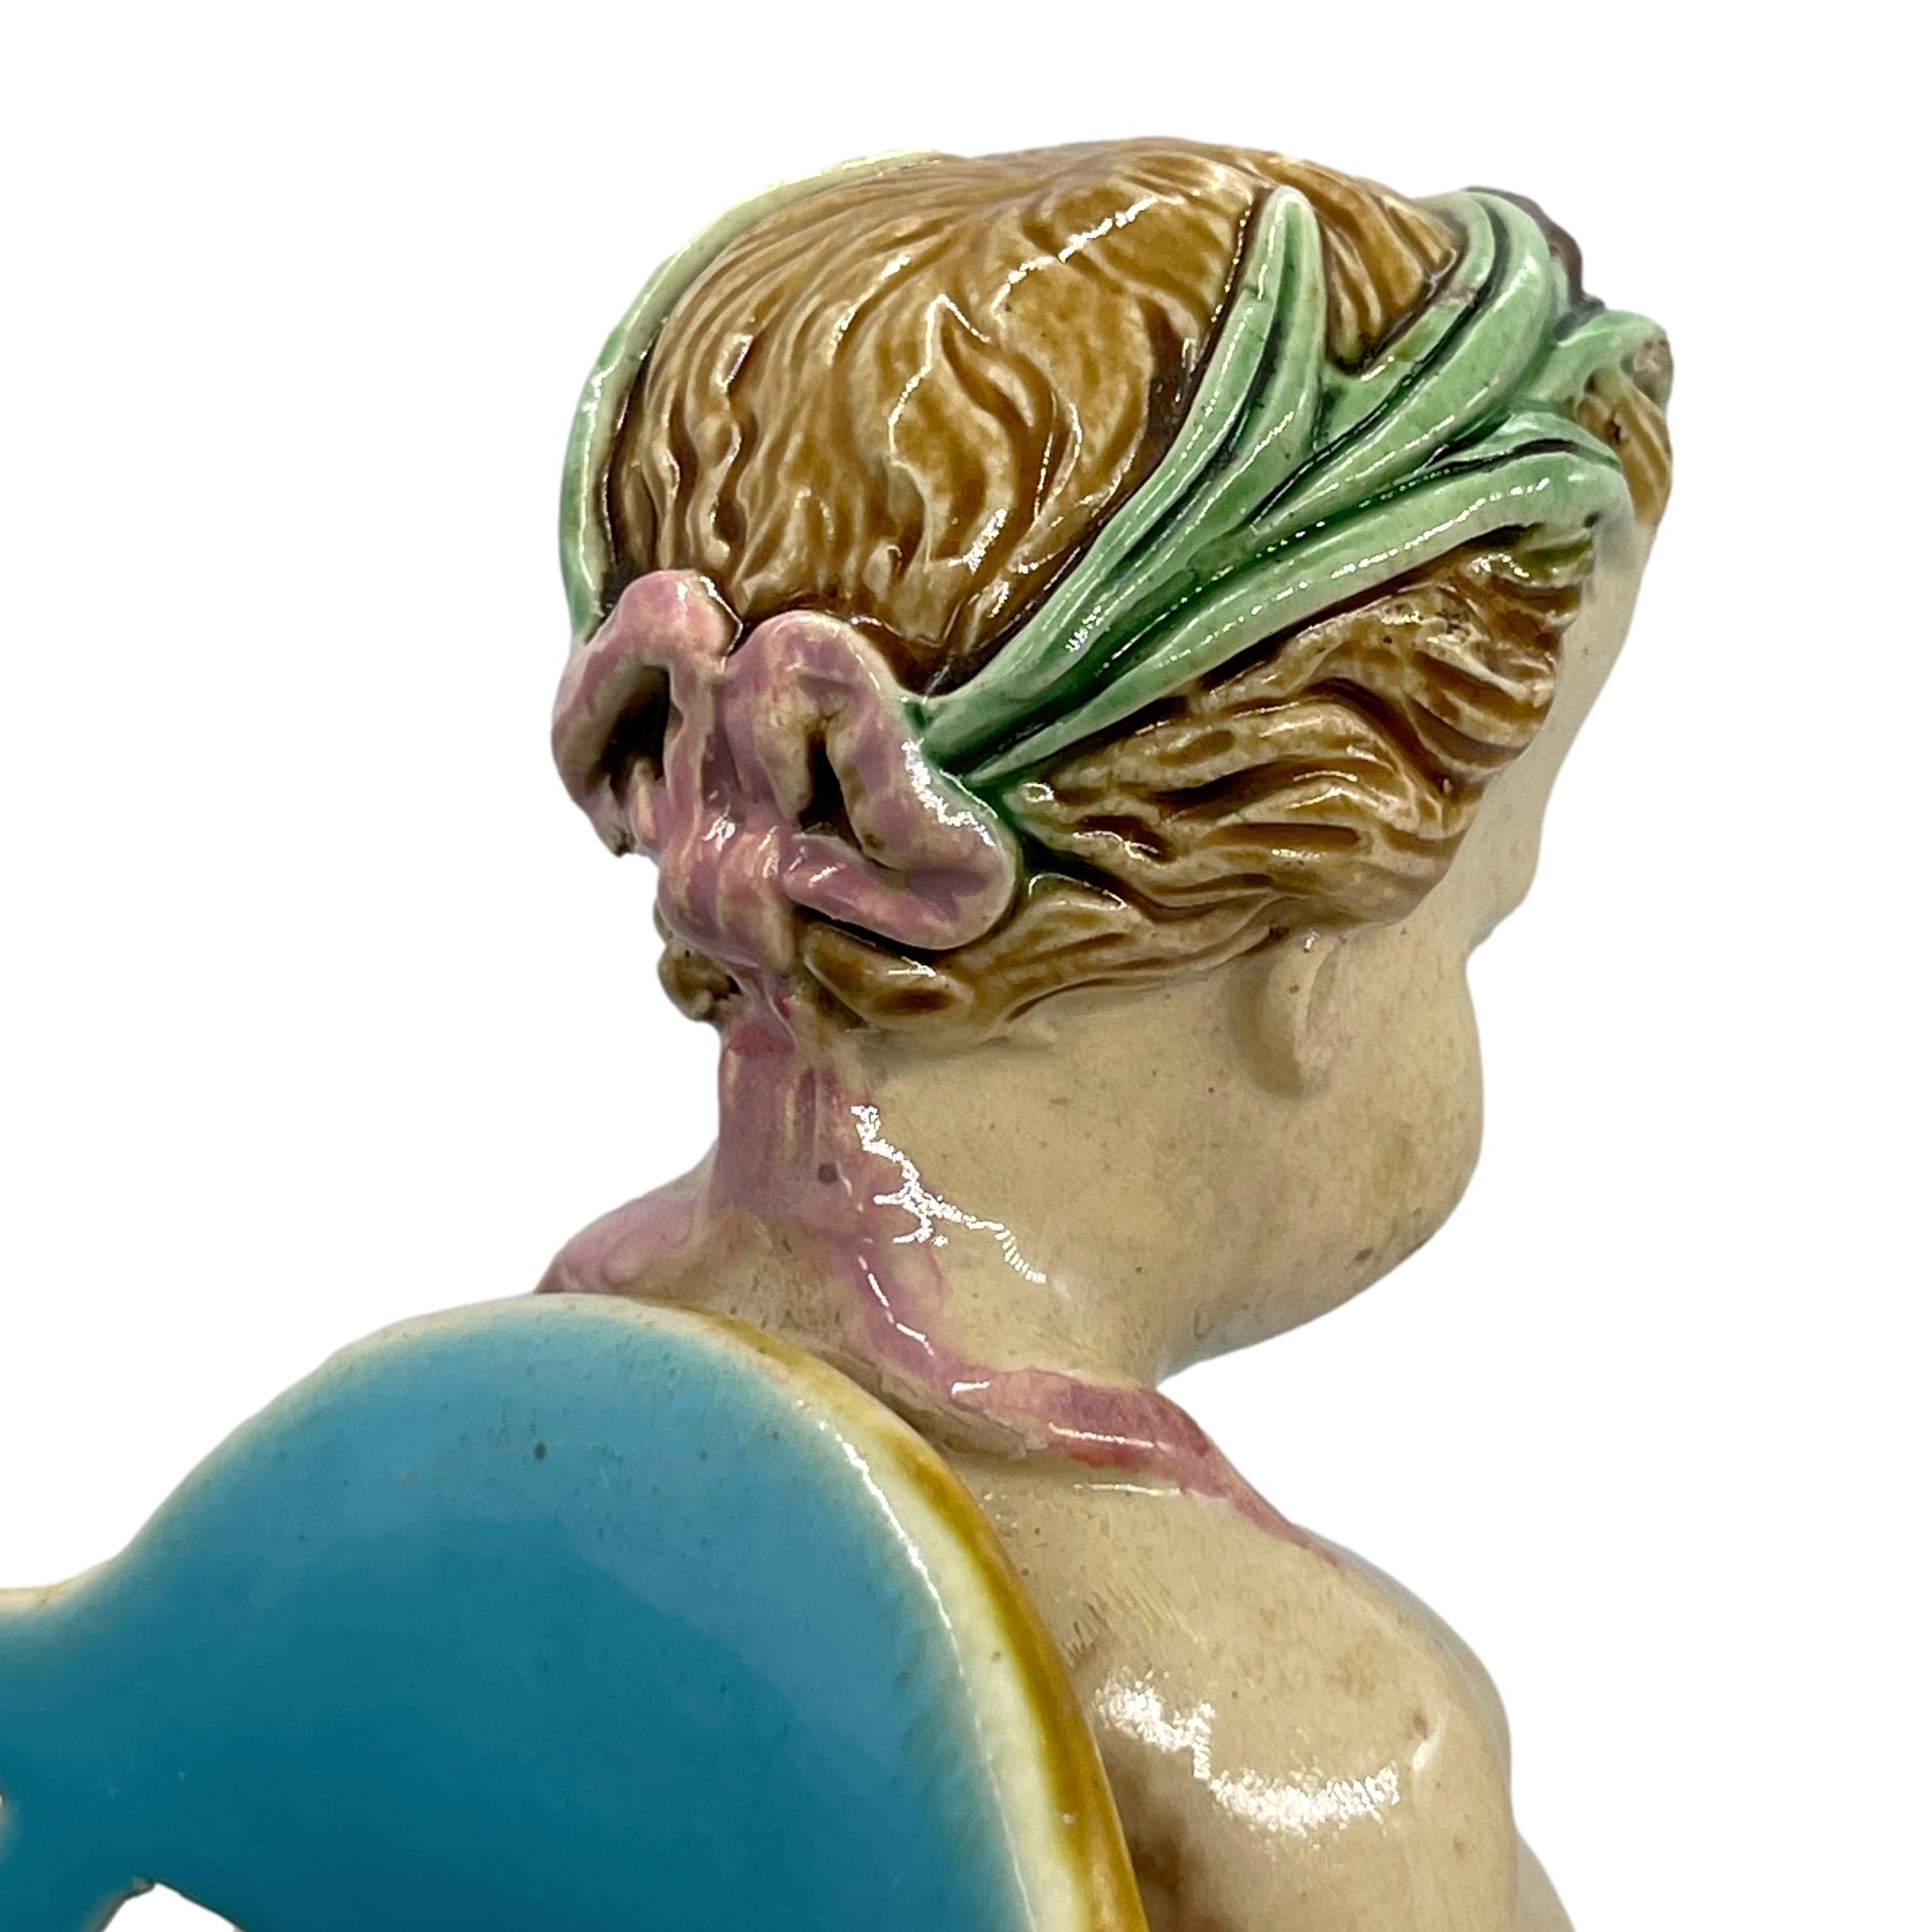 Minton Majolica Faun Reticulated Basket by A. Carrier-Belleuse, Dated 1871 3